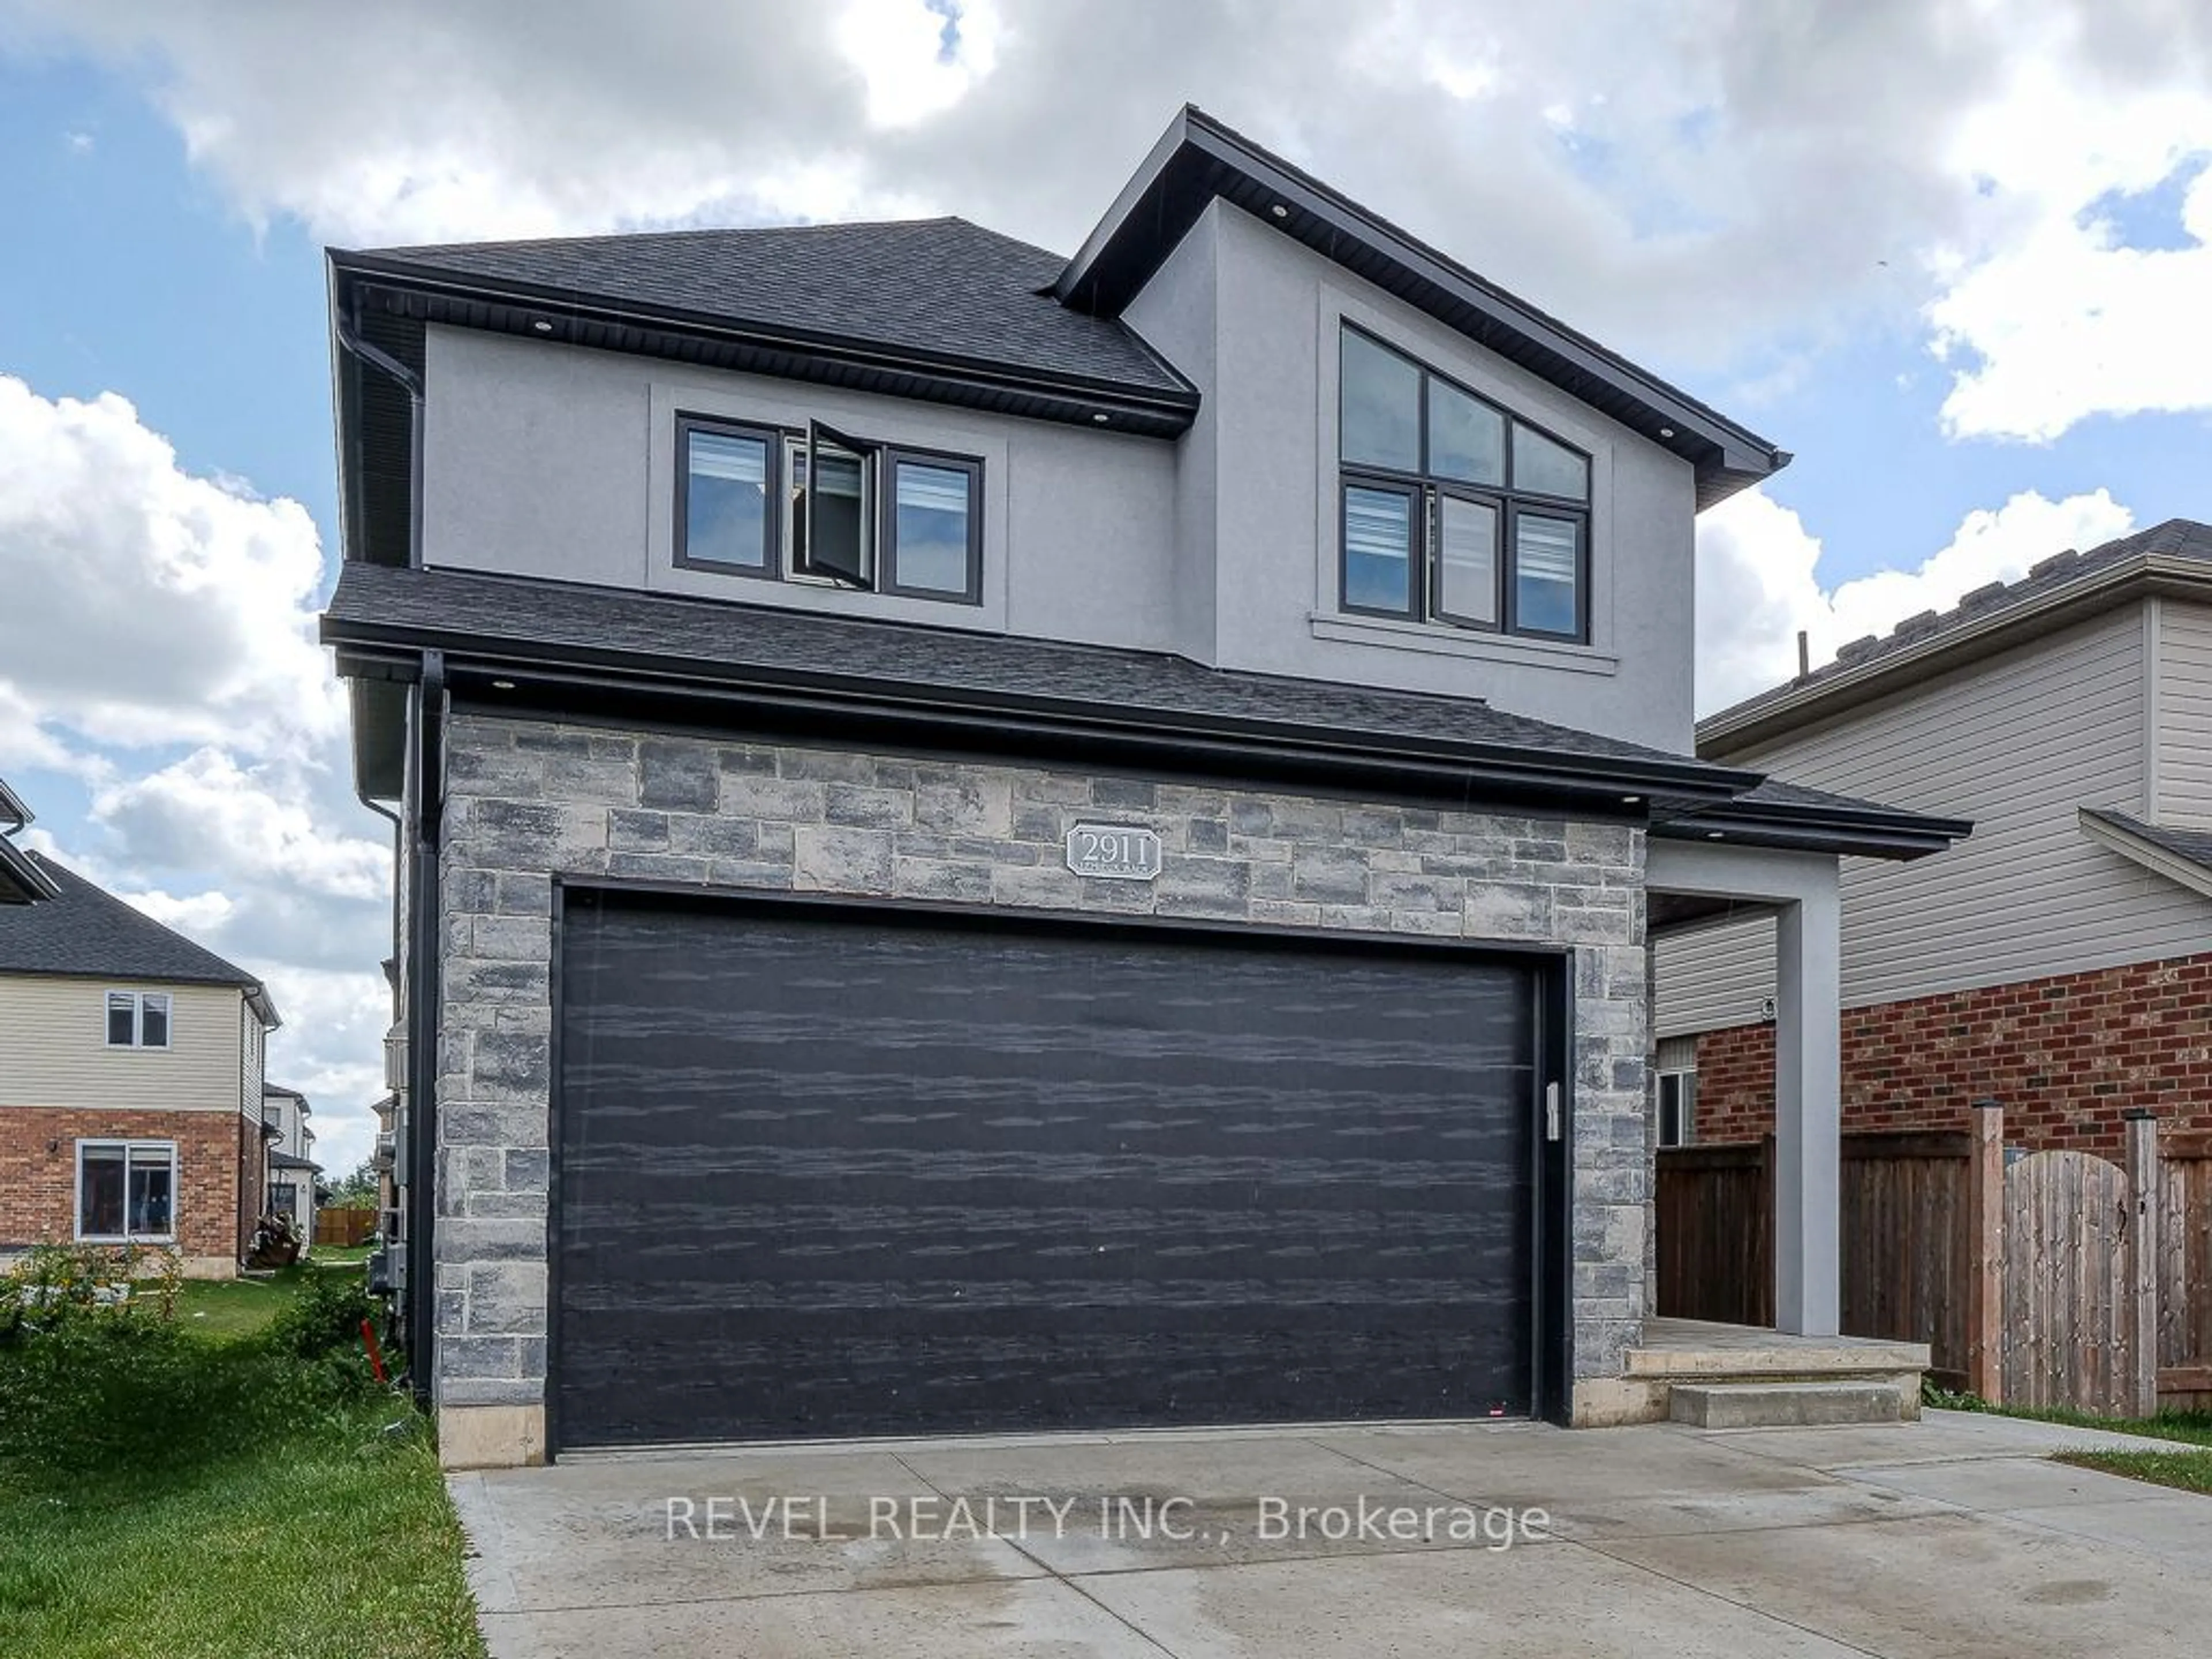 Home with brick exterior material for 2911 Lemieux Walk, London Ontario N6L 0A9